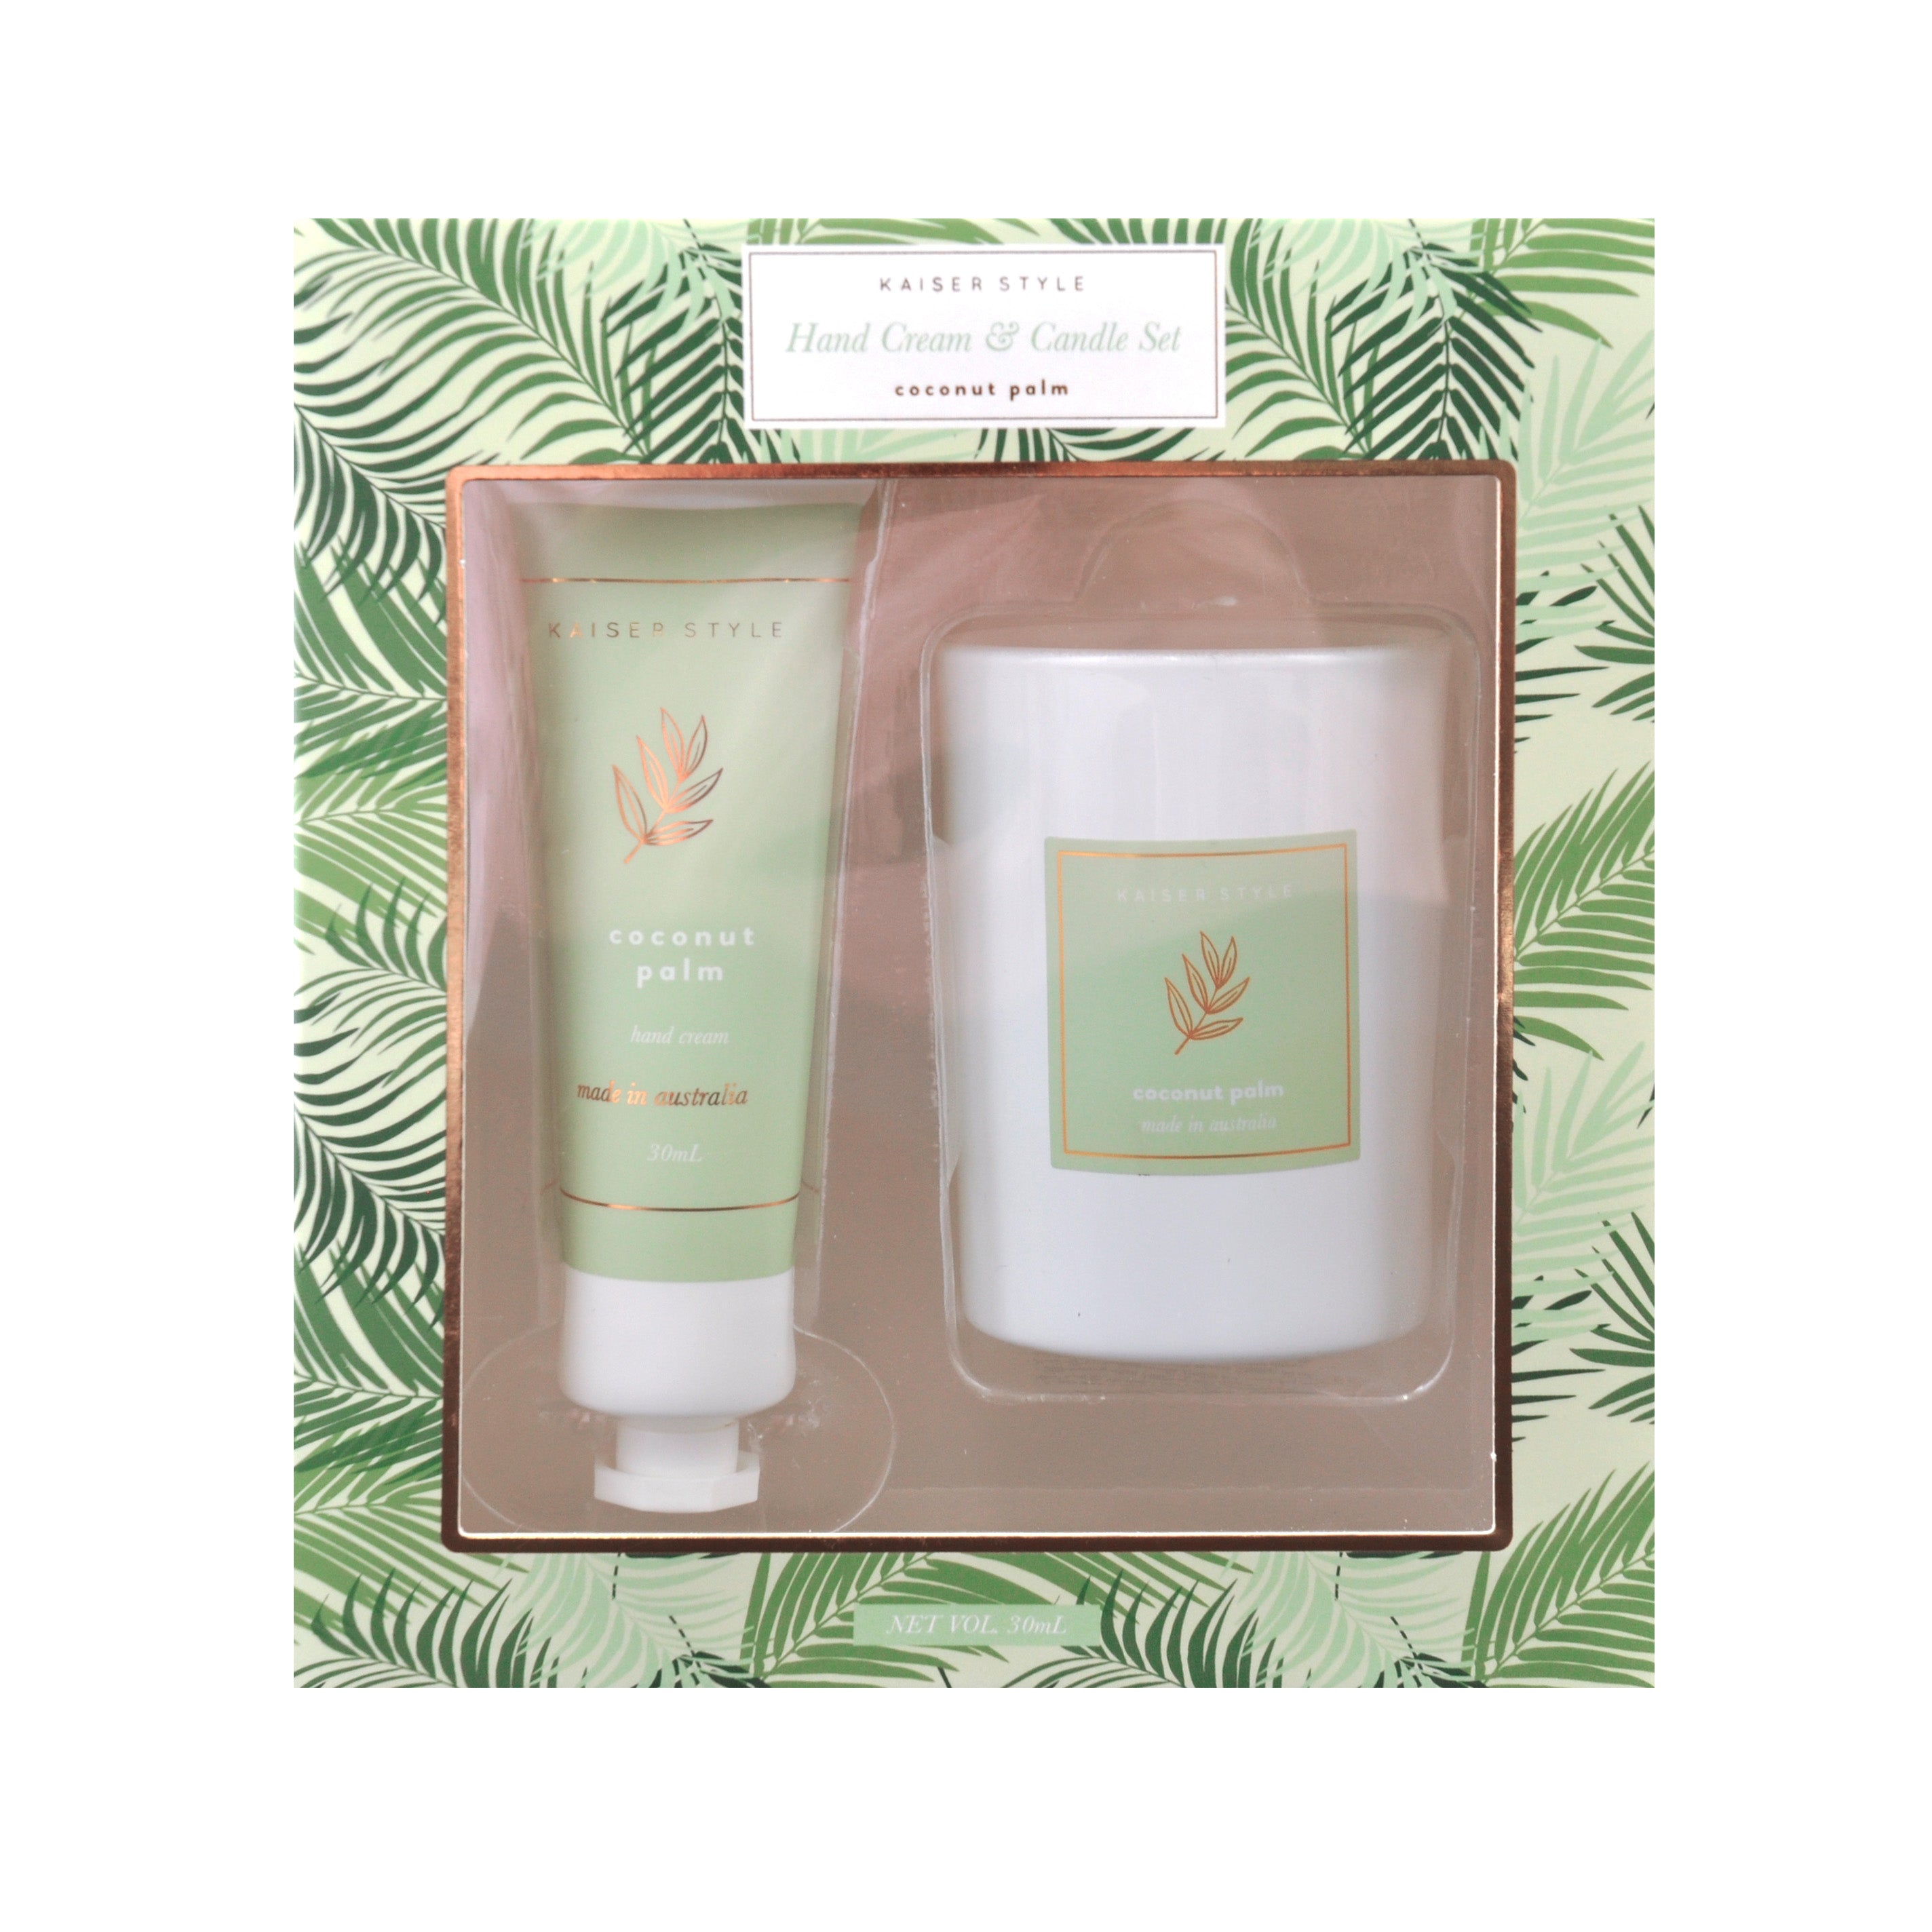 Hand Cream & Candle Gift Pk - COCONUT PALM